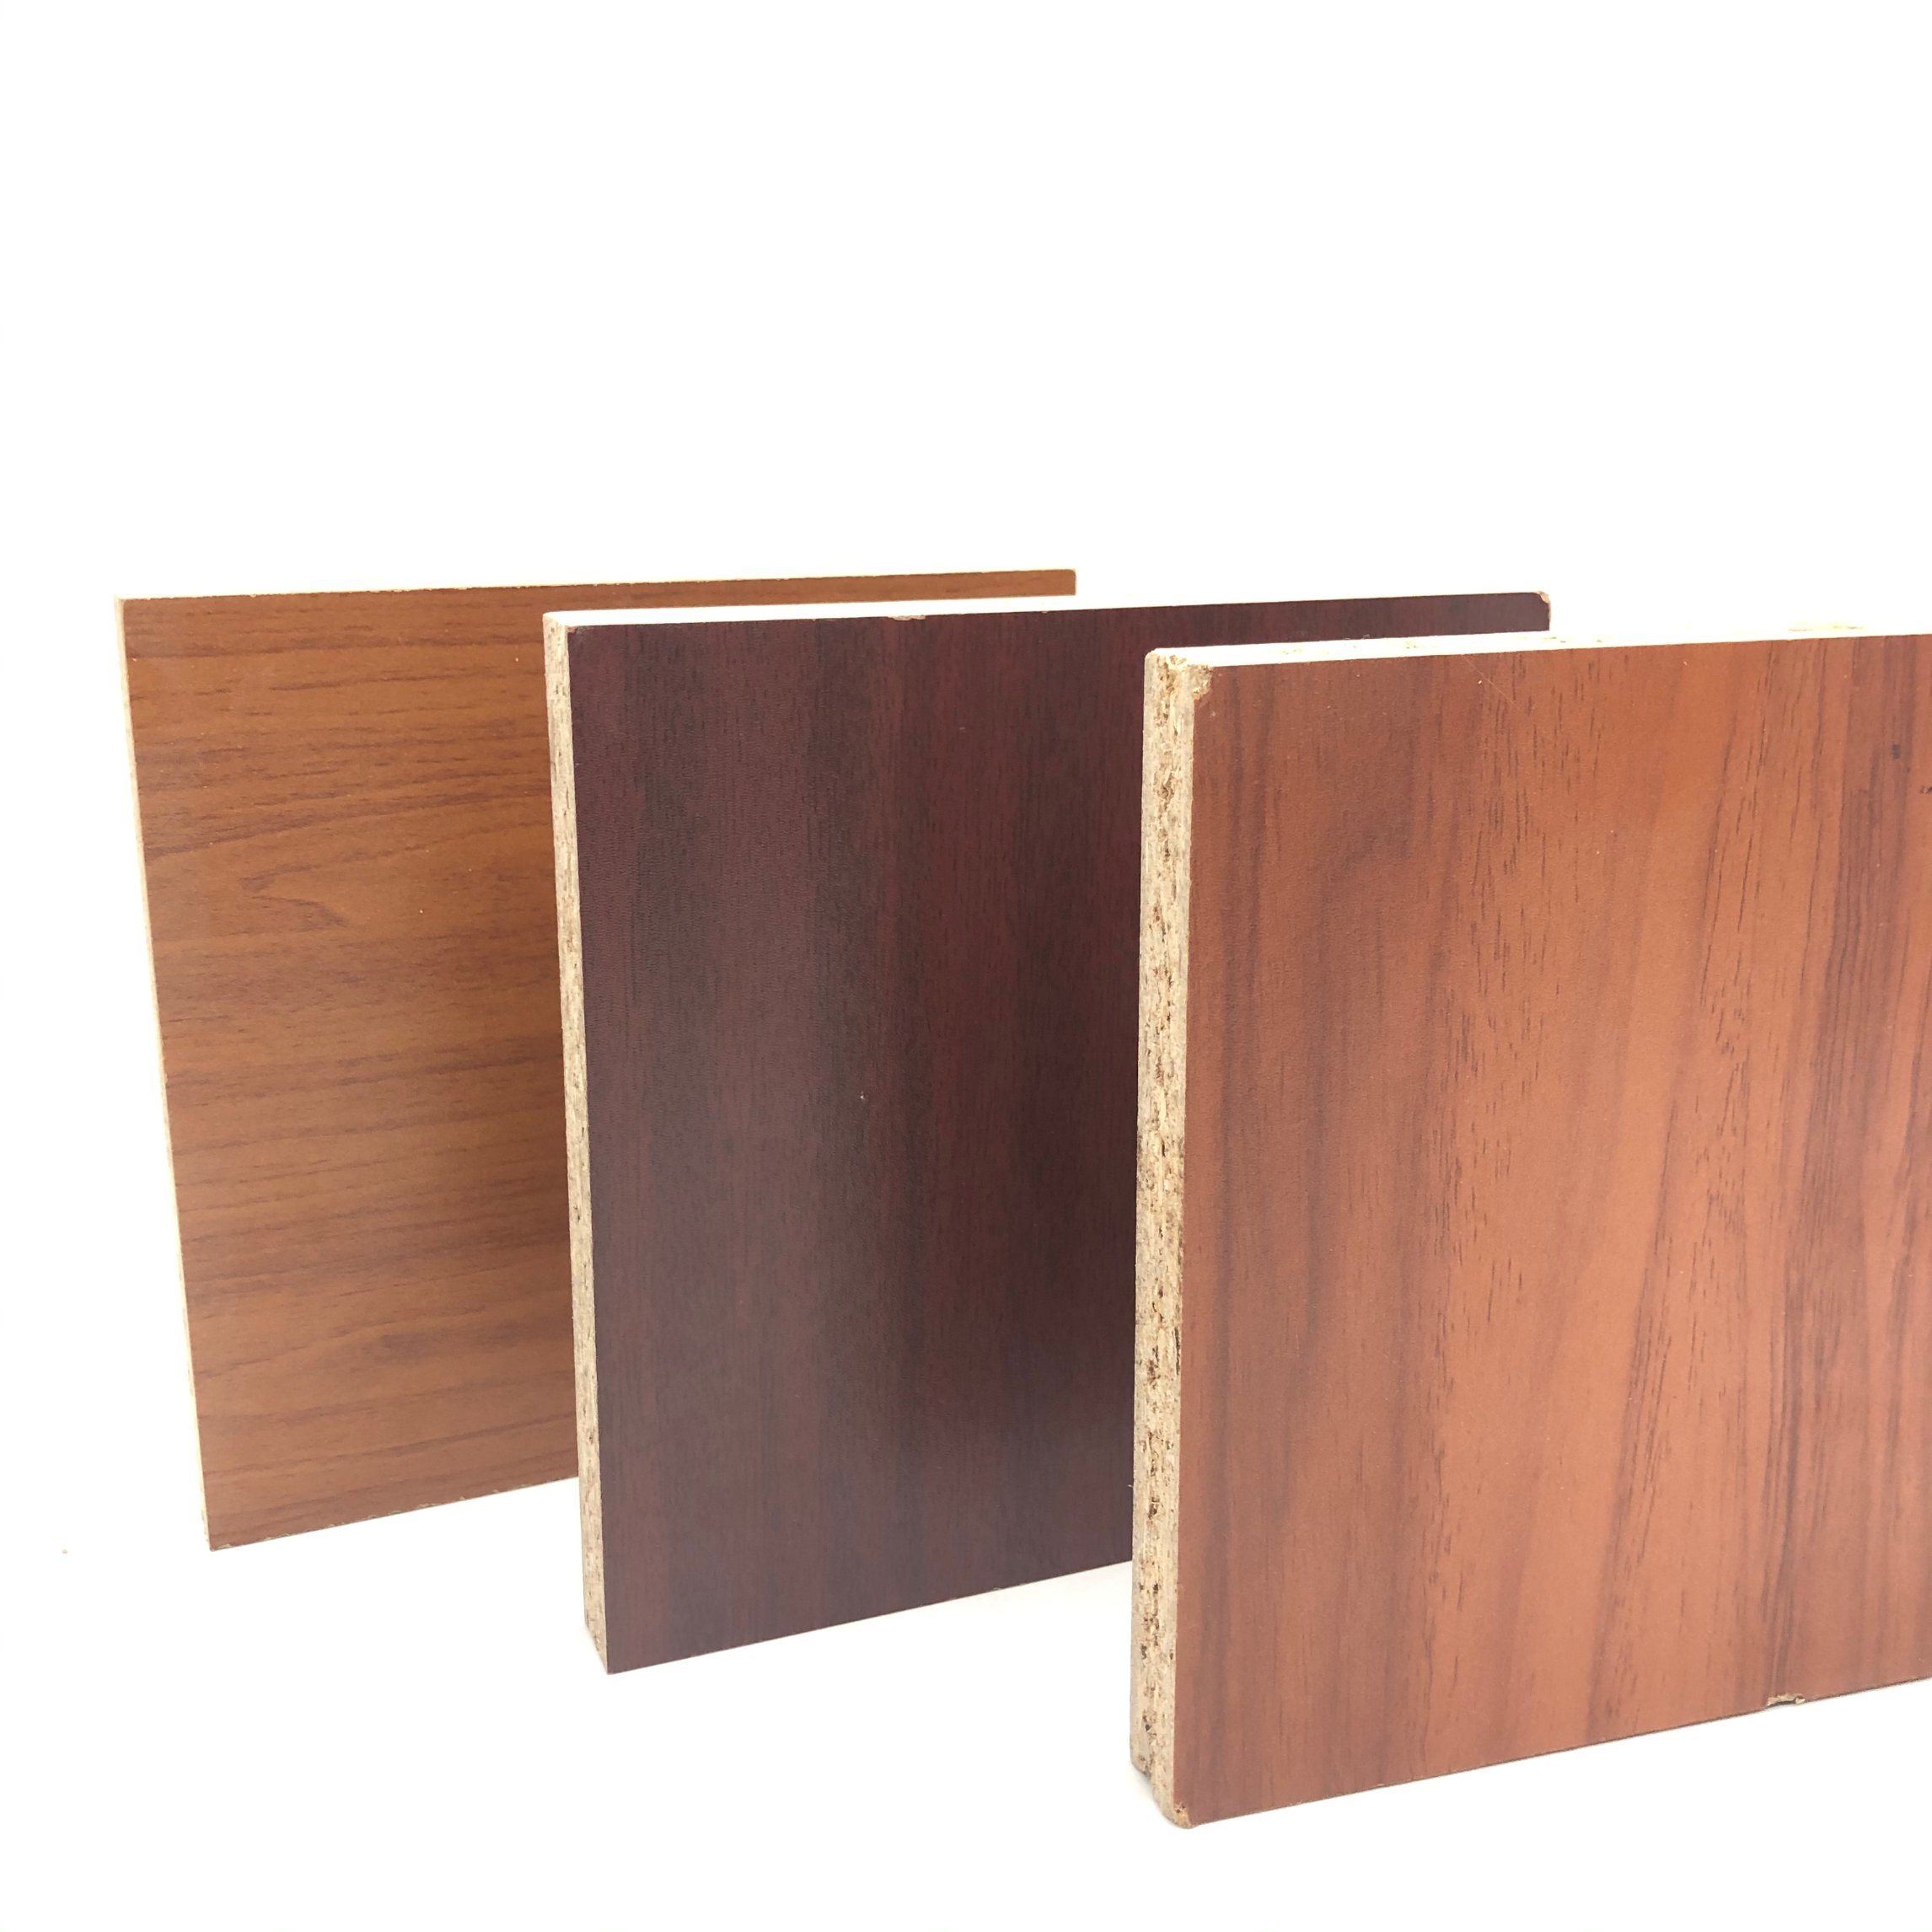 1220X2440 Melamine Laminated Particle Board